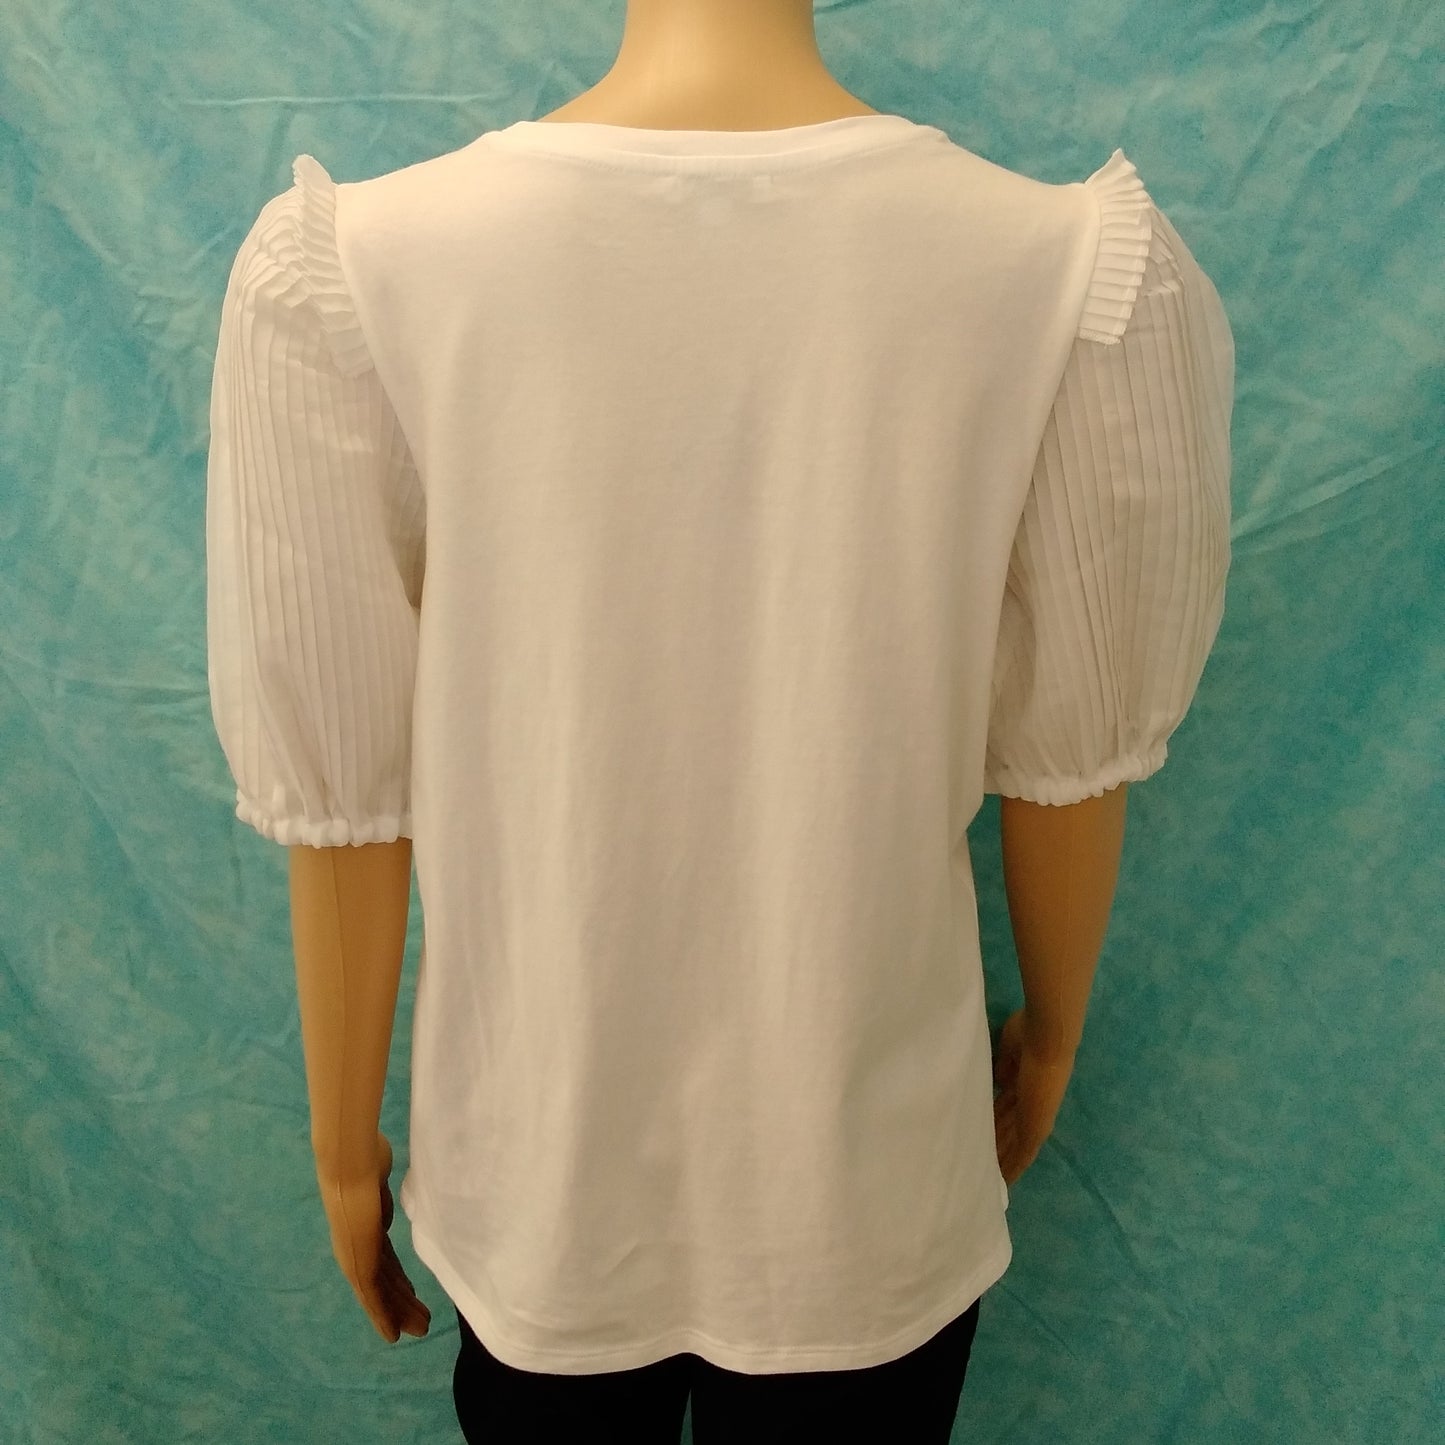 NWT - Express White Pleated Organza Puff Sleeve Blouse - L